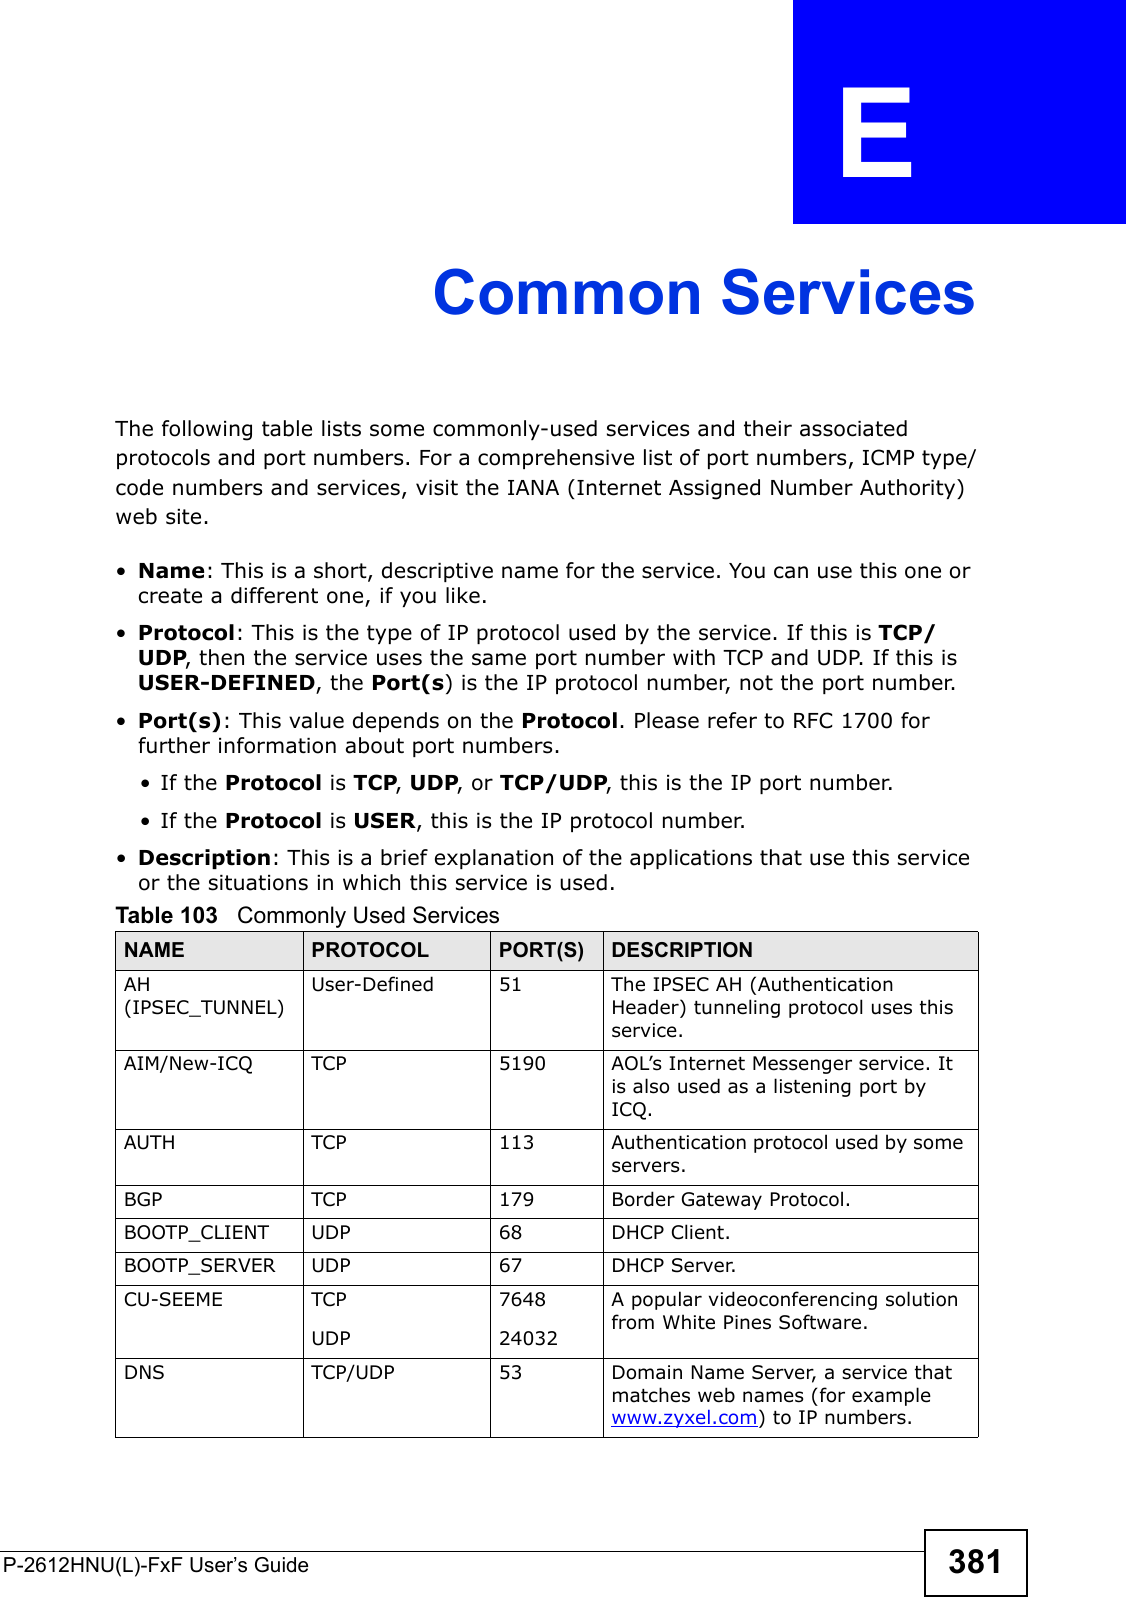 P-2612HNU(L)-FxF User’s Guide 381APPENDIX   E Common ServicesThe following table lists some commonly-used services and their associated protocols and port numbers. For a comprehensive list of port numbers, ICMP type/code numbers and services, visit the IANA (Internet Assigned Number Authority) web site. •Name: This is a short, descriptive name for the service. You can use this one or create a different one, if you like.•Protocol: This is the type of IP protocol used by the service. If this is TCP/UDP, then the service uses the same port number with TCP and UDP. If this isUSER-DEFINED, the Port(s) is the IP protocol number, not the port number.•Port(s): This value depends on the Protocol. Please refer to RFC 1700 for further information about port numbers.• If the Protocol is TCP, UDP, or TCP/UDP, this is the IP port number.• If the Protocol is USER, this is the IP protocol number.•Description: This is a brief explanation of the applications that use this service or the situations in which this service is used.Table 103   Commonly Used ServicesNAME PROTOCOL PORT(S) DESCRIPTIONAH (IPSEC_TUNNEL)User-Defined 51 The IPSEC AH (Authentication Header) tunneling protocol uses this service.AIM/New-ICQ TCP 5190 AOL’s Internet Messenger service. It is also used as a listening port by ICQ.AUTH TCP 113 Authentication protocol used by someservers.BGP TCP 179 Border Gateway Protocol.BOOTP_CLIENT UDP 68 DHCP Client.BOOTP_SERVER UDP 67 DHCP Server.CU-SEEME TCPUDP764824032A popular videoconferencing solution from White Pines Software.DNS TCP/UDP 53 Domain Name Server, a service that matches web names (for examplewww.zyxel.com) to IP numbers.